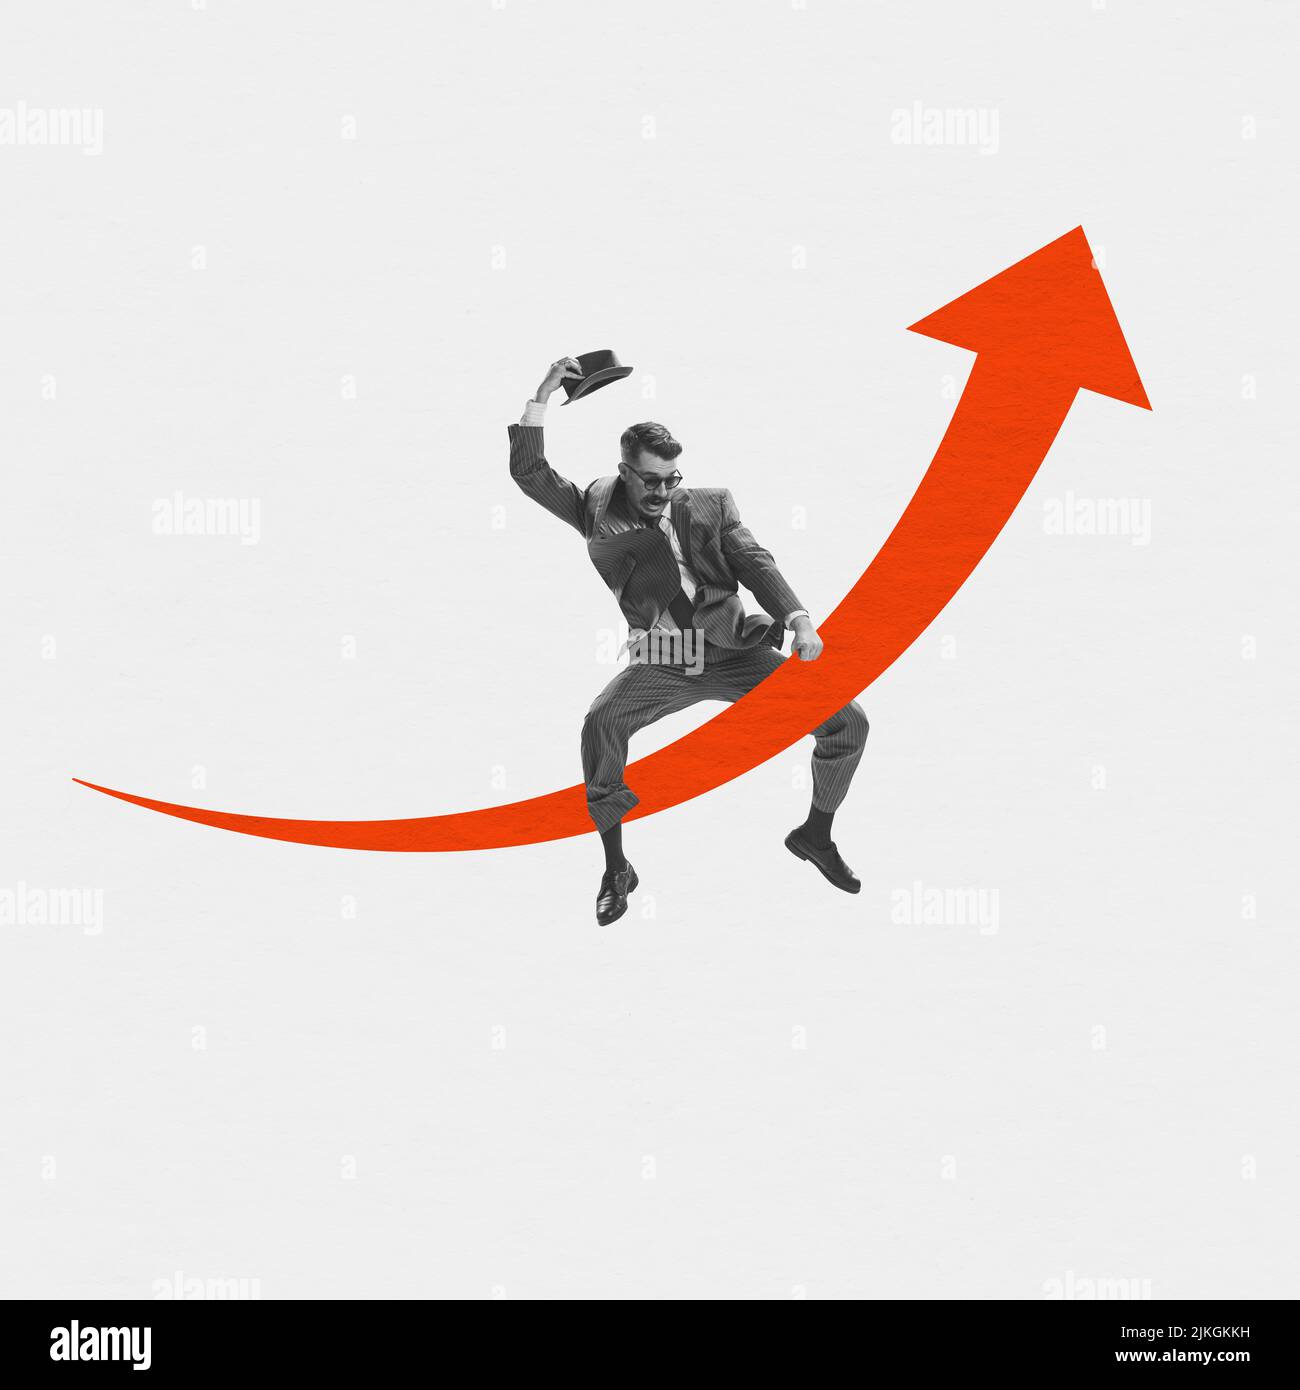 Excited businessman flying on drawn ornage arrow isolated over white background. Concept of business, art, psychology of success Stock Photo